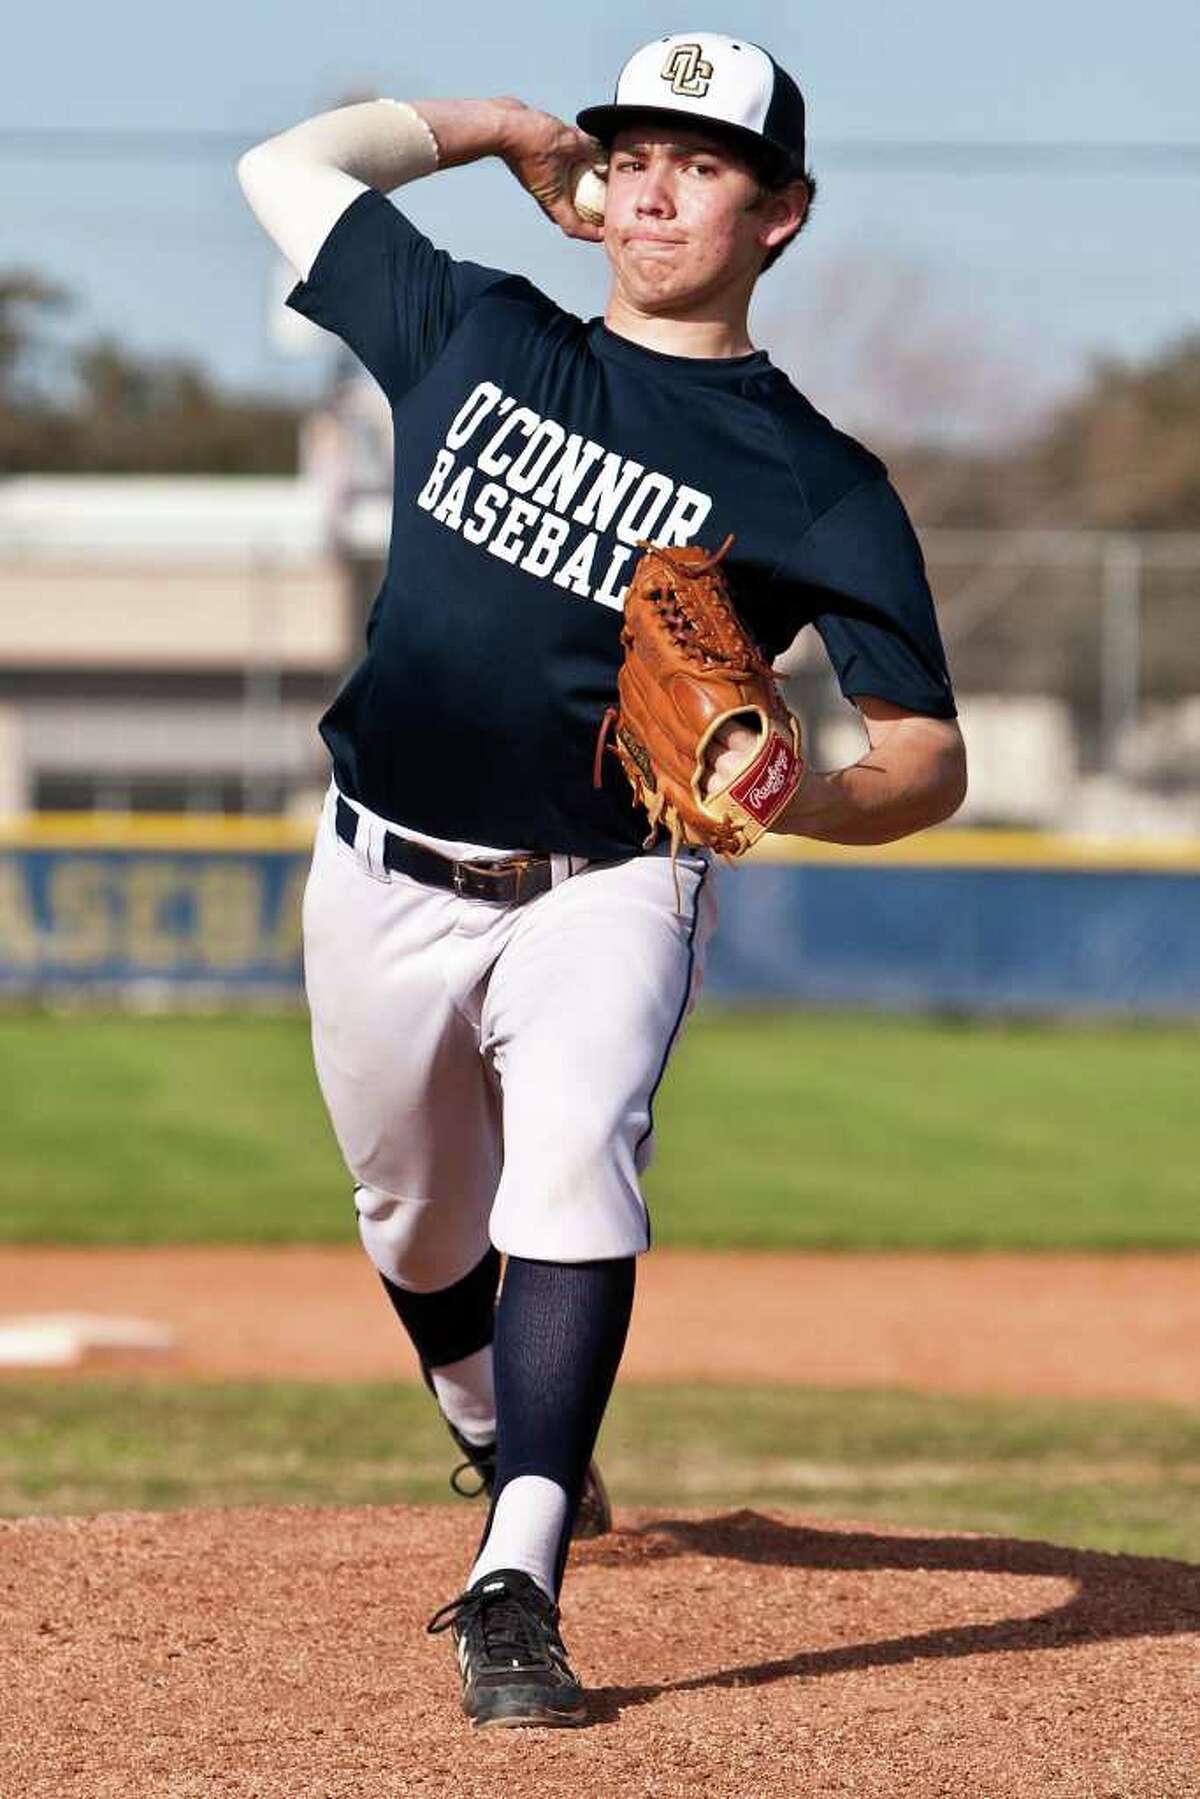 O'Connor's Mark Ecker throws from the mound during a practice session at the School on Feb. 22, 2012. Ecker struck out 16 batters and threw a one-hitter in the Panther's 2-0 victory over Holmes in the season opener a day earlier. Photo by Marvin Pfeiffer / Prime Time Newspapers